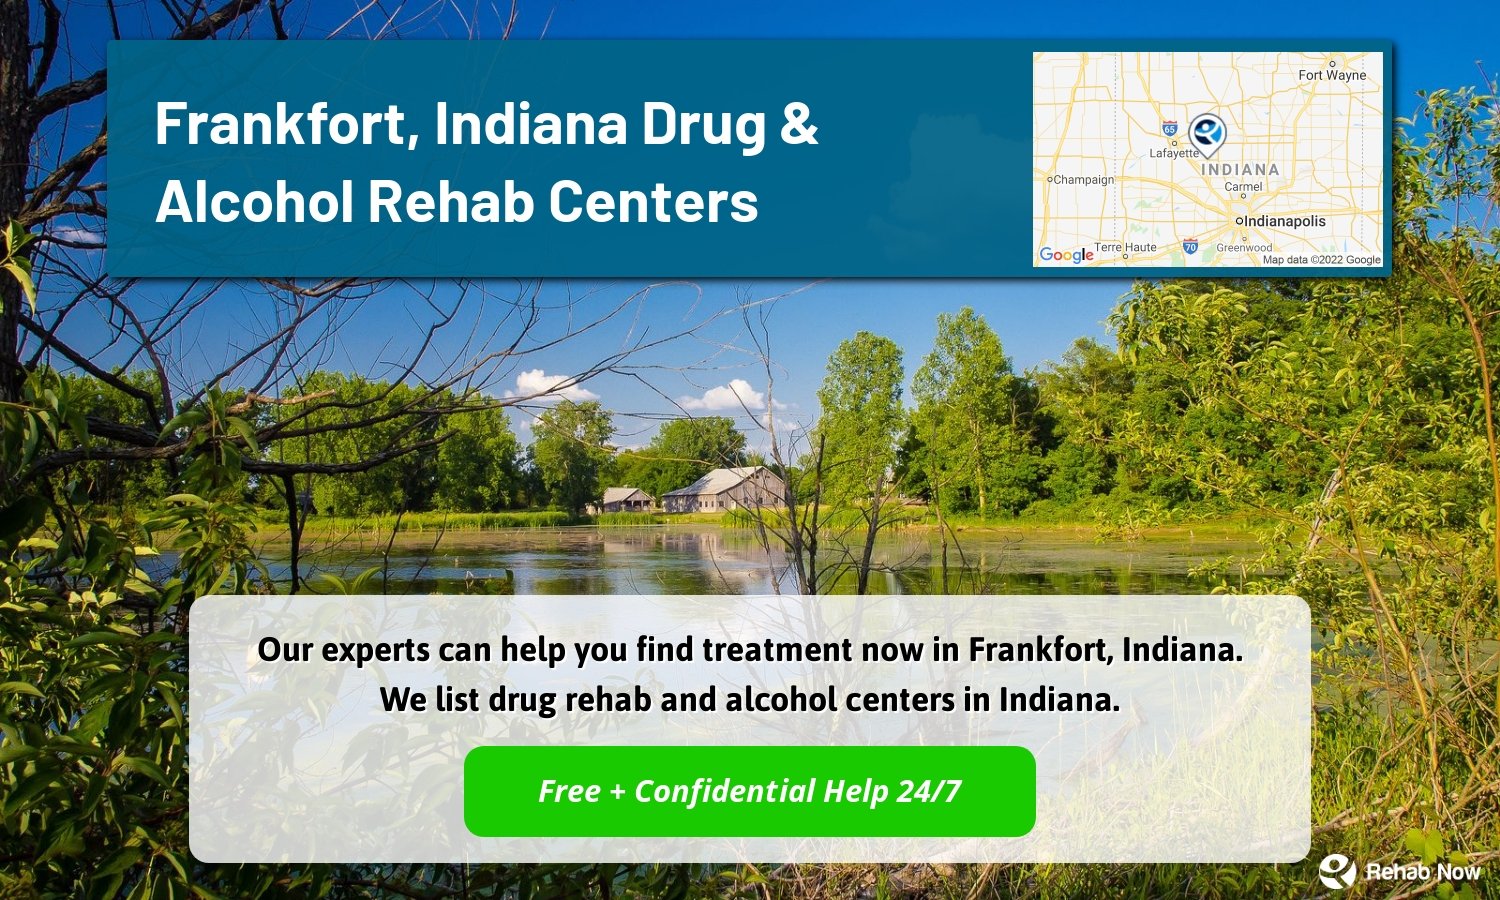 Our experts can help you find treatment now in Frankfort, Indiana. We list drug rehab and alcohol centers in Indiana.